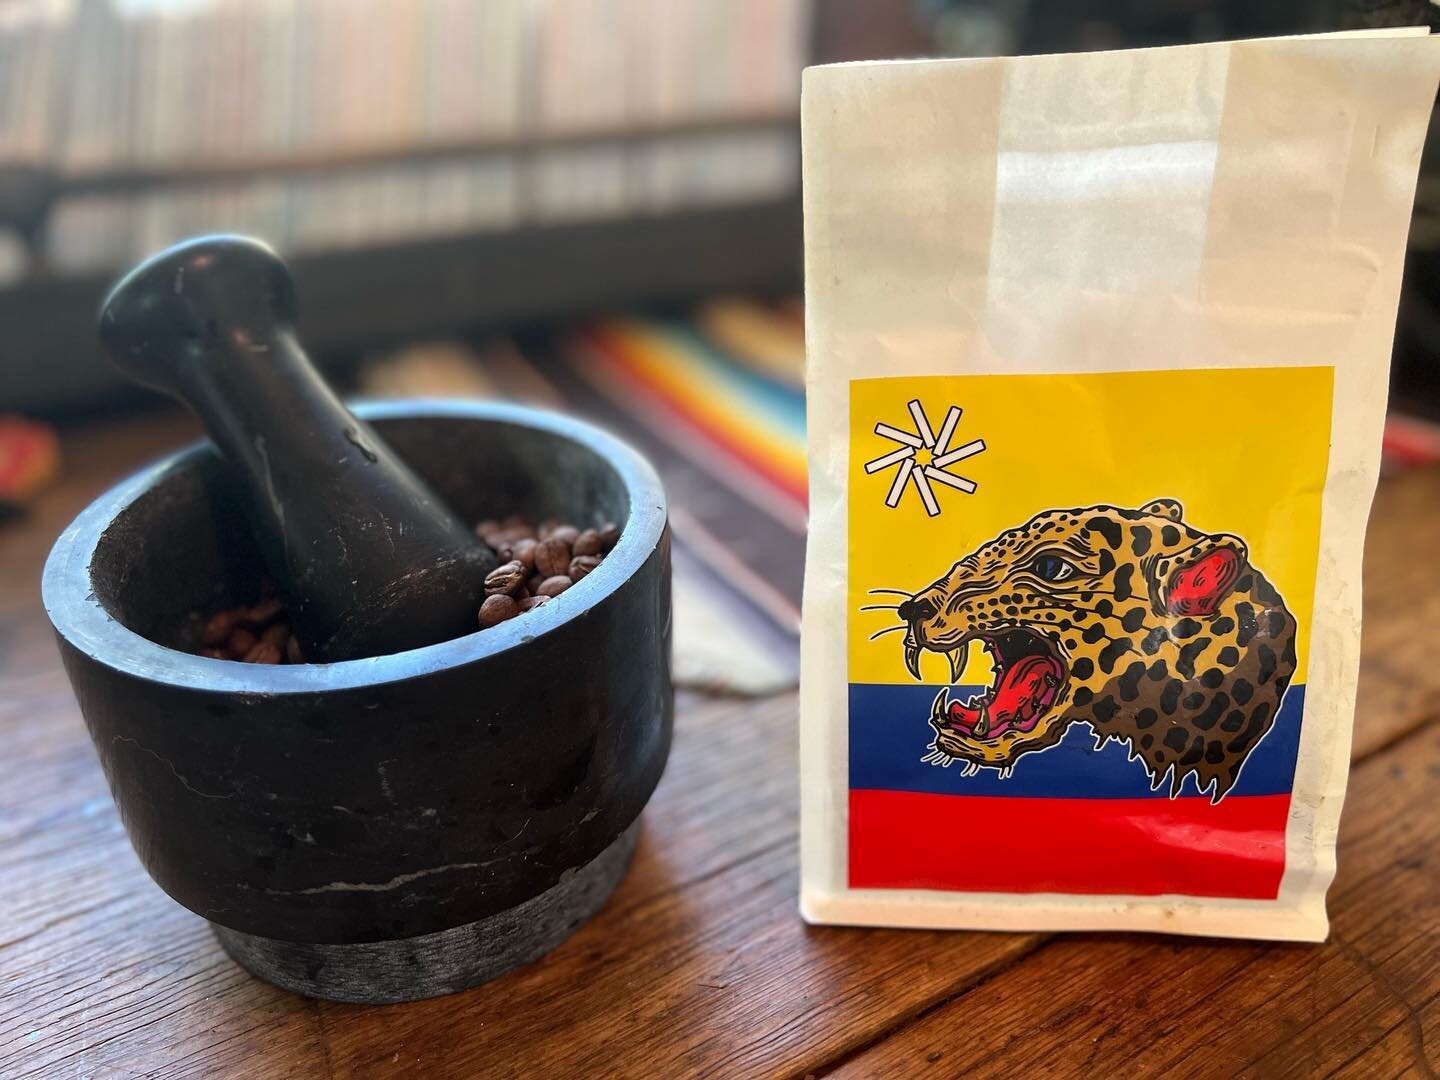 Had to get creative making coffee today without a grinder at the house&hellip;and man was it good. @colorroasters continues to blow my mind with their nuanced roasting of very special selections. This Finca Pisashi from Pichincha, Ecuador is dreamy. 